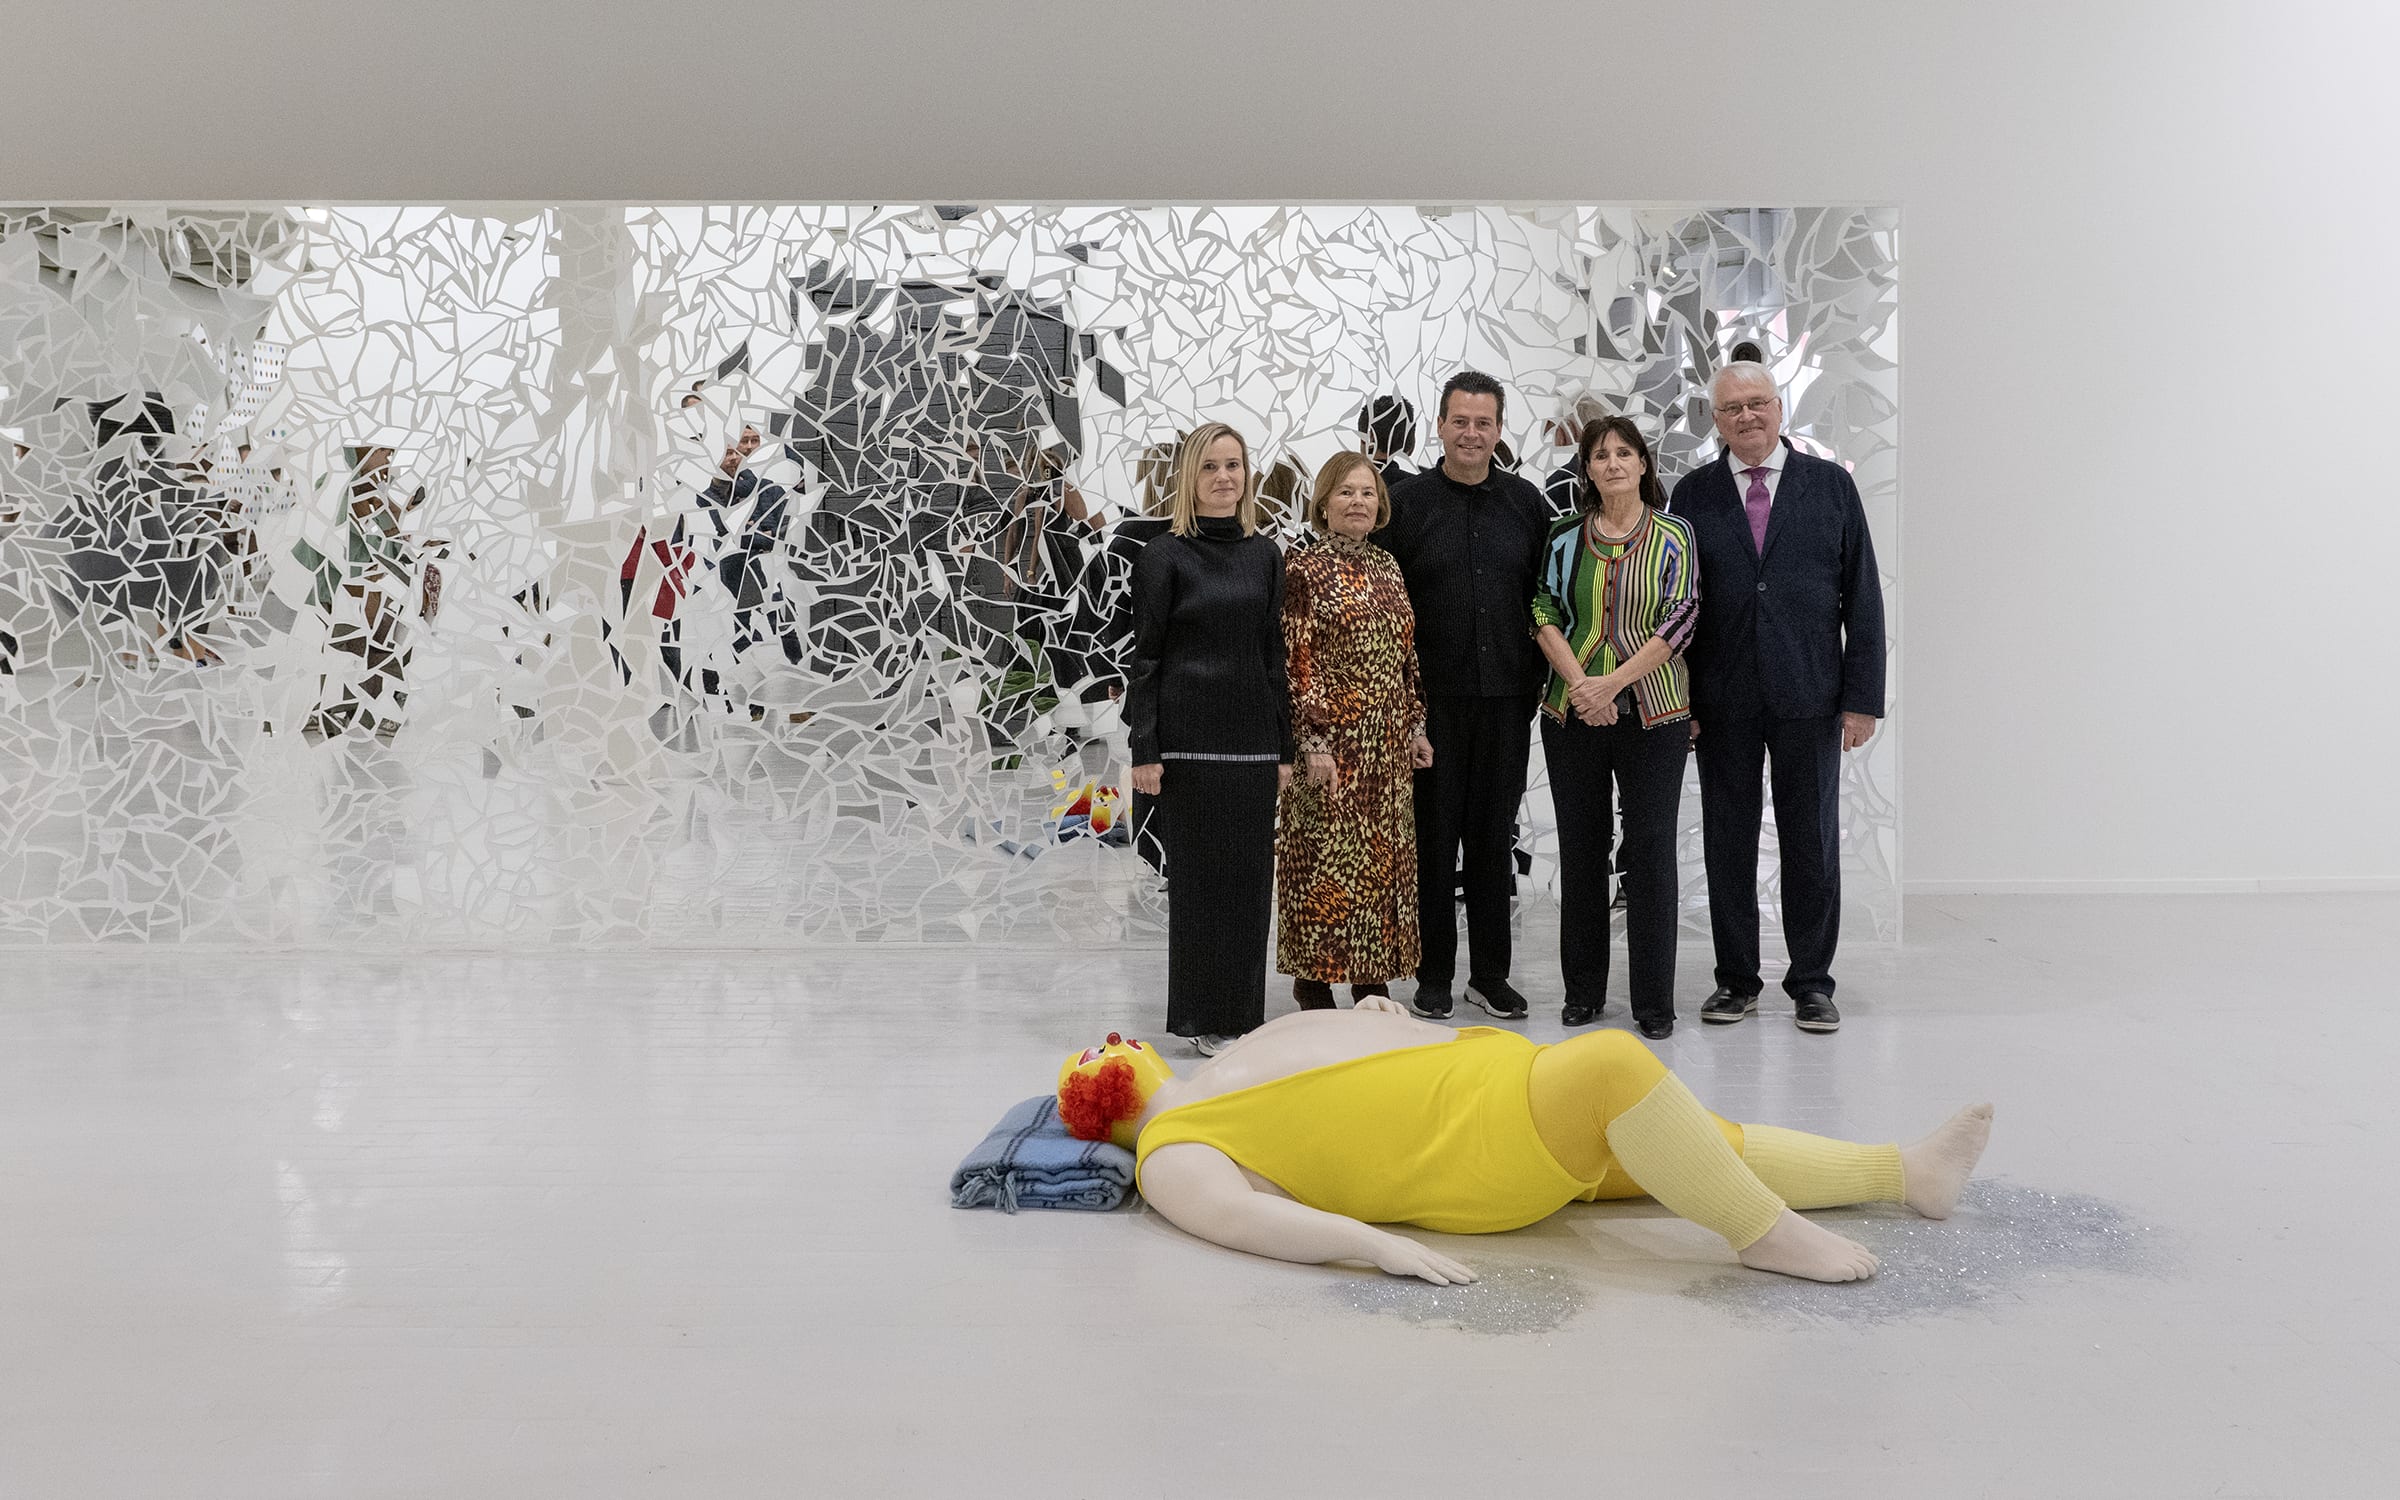 Famille Vanhaerents with Caroline David, curator of Lille3000, next to works by Ugo Rondidone at Tripostal. Photograph by Joost Vanhaerents. Courtesy of the Vanhaerents Art Collection Brussels.     